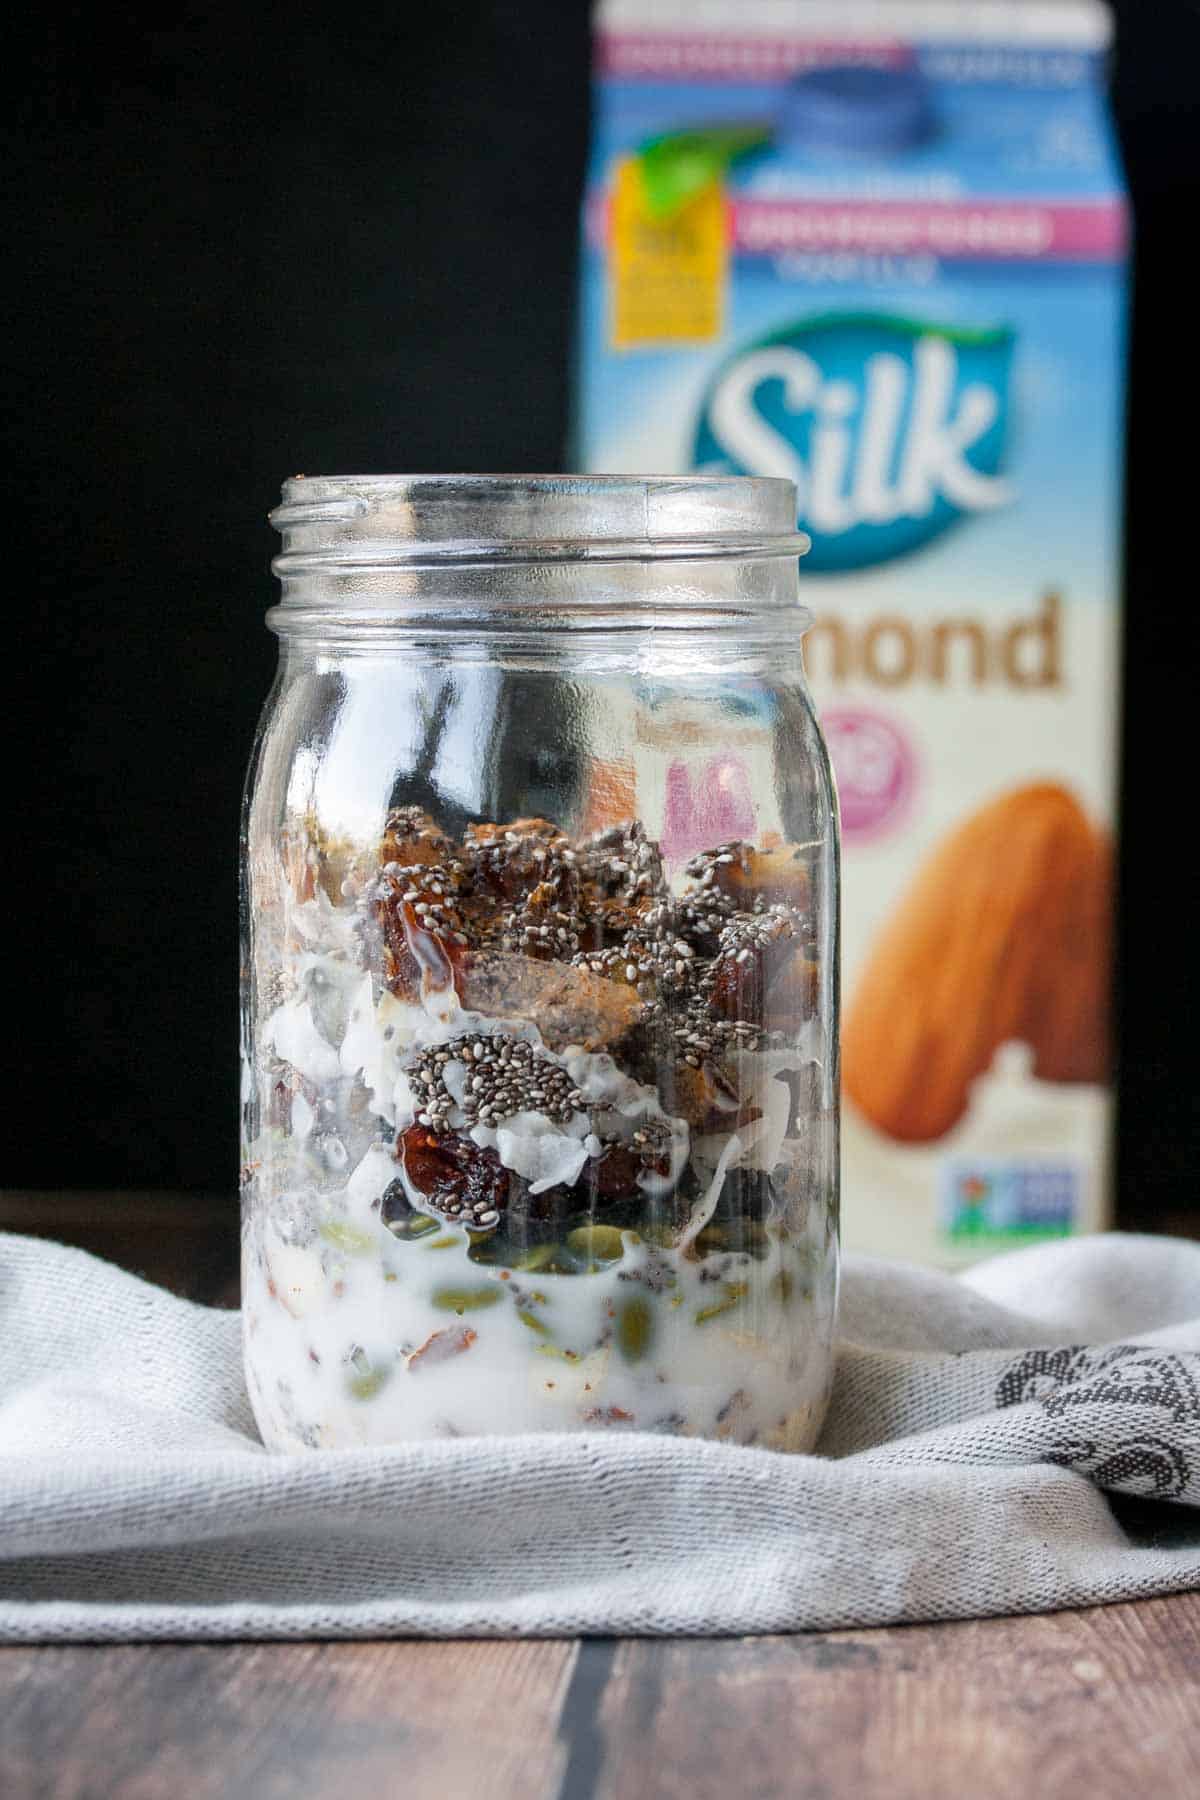 A jar with dried fruits, seeds, nuts and oats with milk at the bottom in front of a colorful container of almond milk.